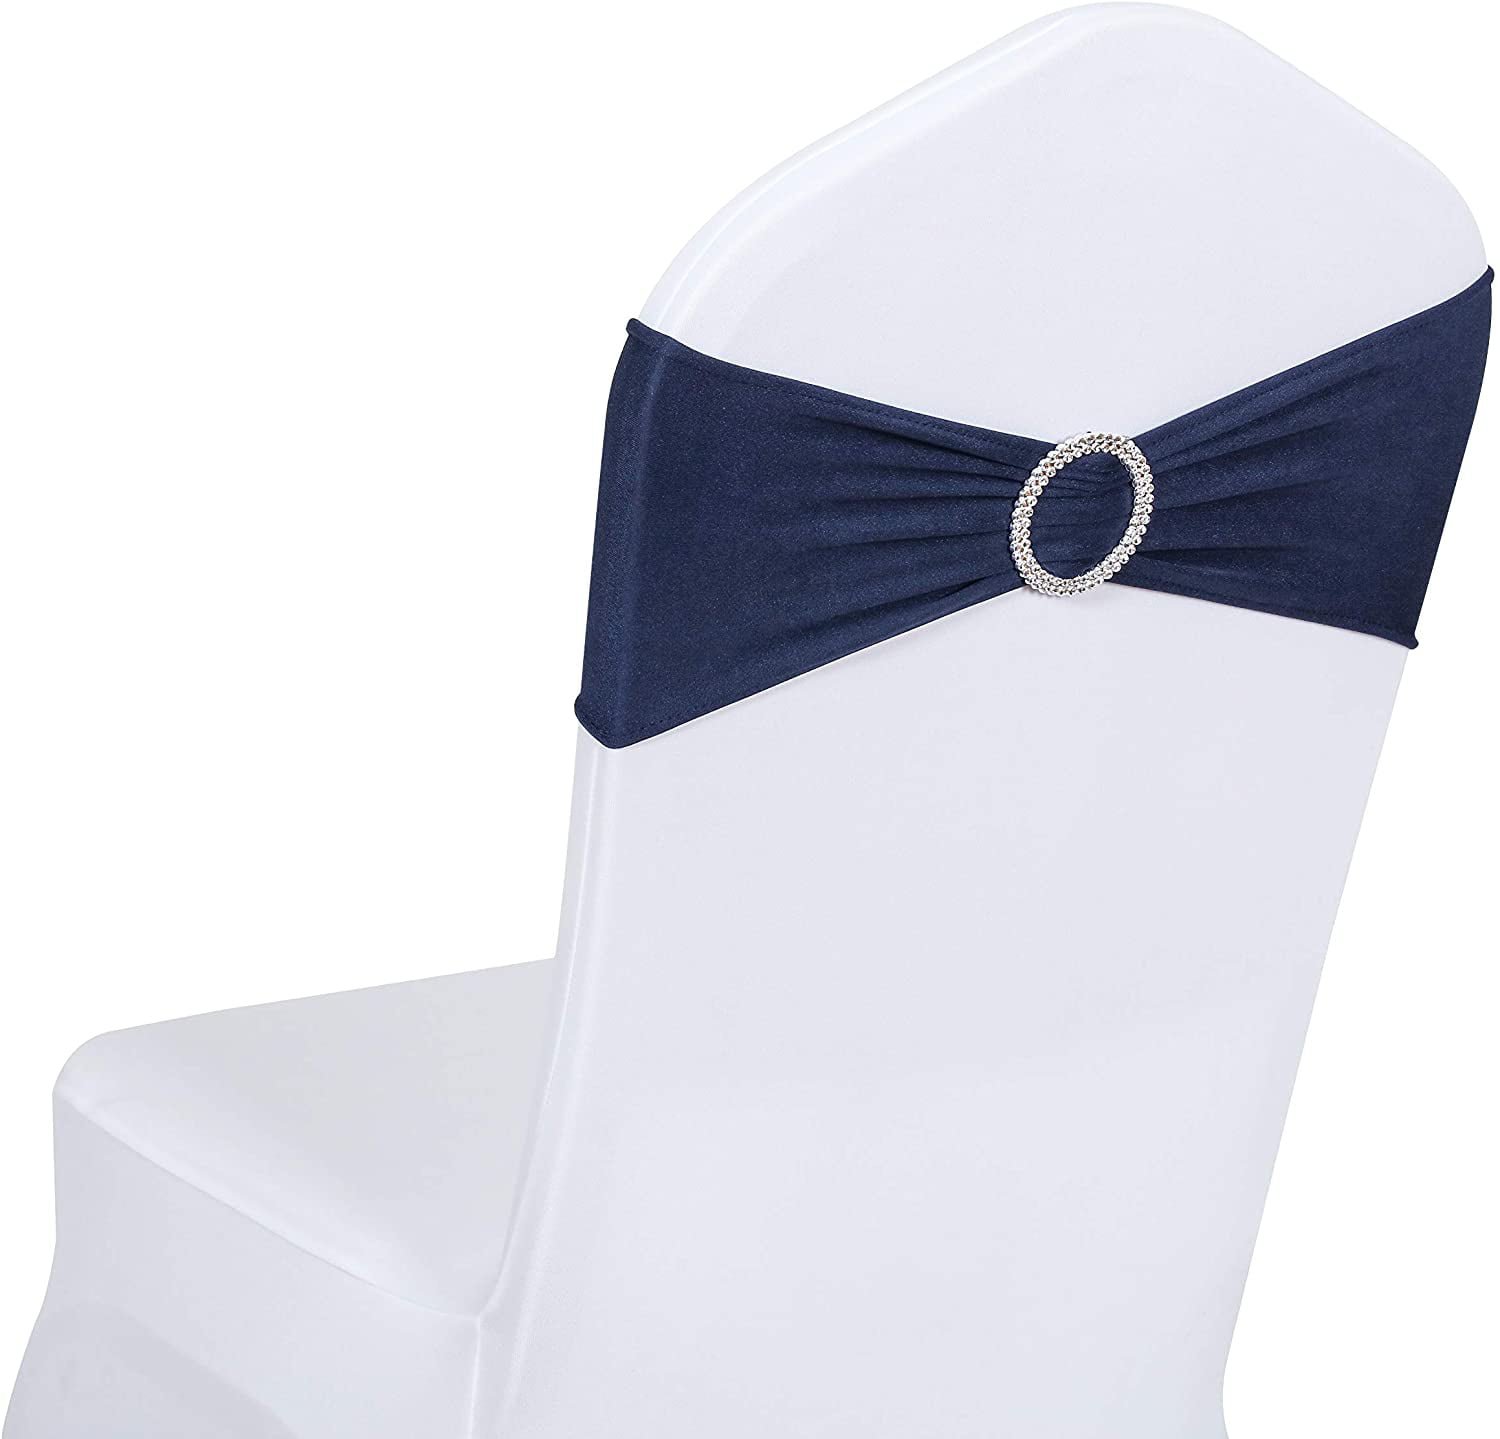 50 Banquet Polyester Chair Covers Made in USA High Quality 3 Colors Wedding 